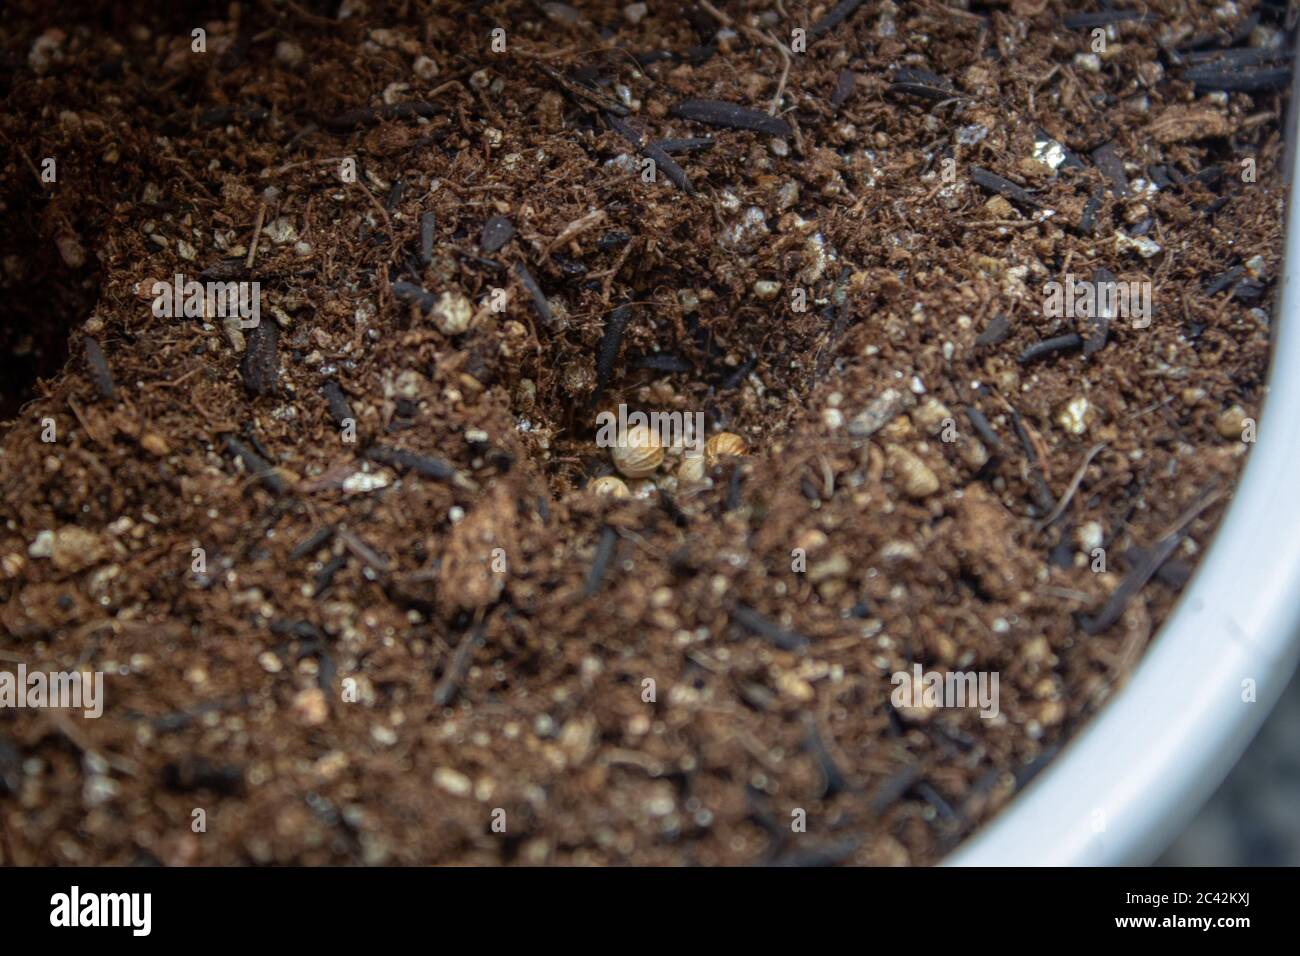 Holes on the soil of a home garden for planting some herbs Stock Photo